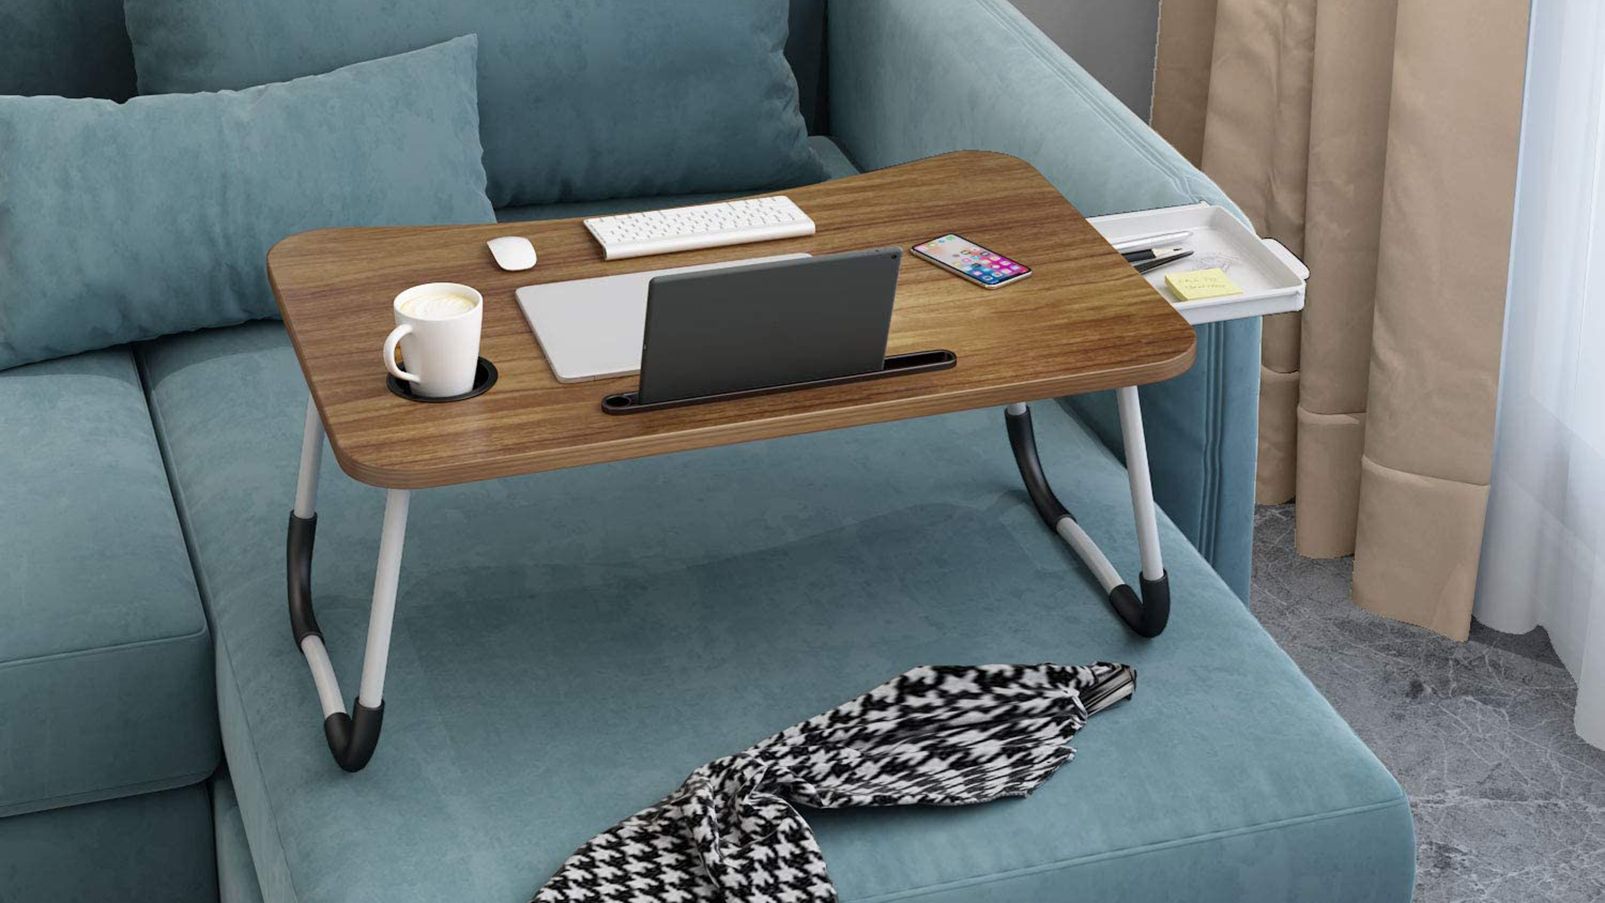 Lap desk buying guide: Work and game comfortably from your couch